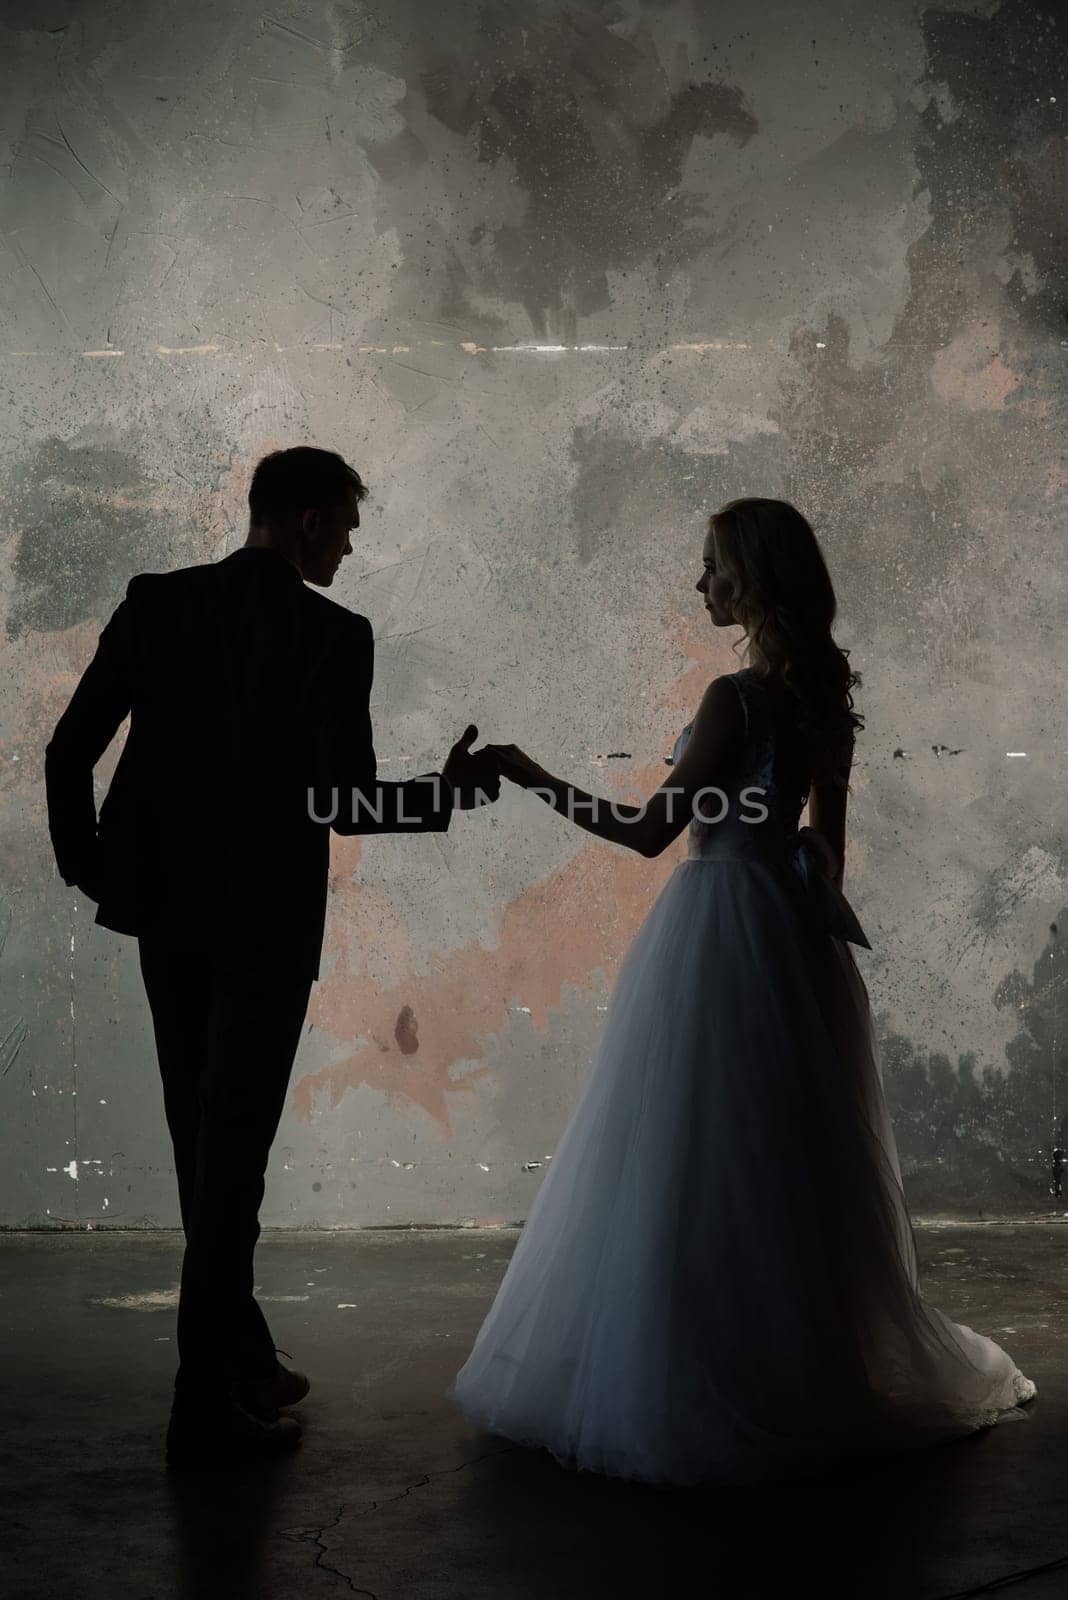 Art fashion studio photo of wedding couple silhouette groom and bride on colors background.